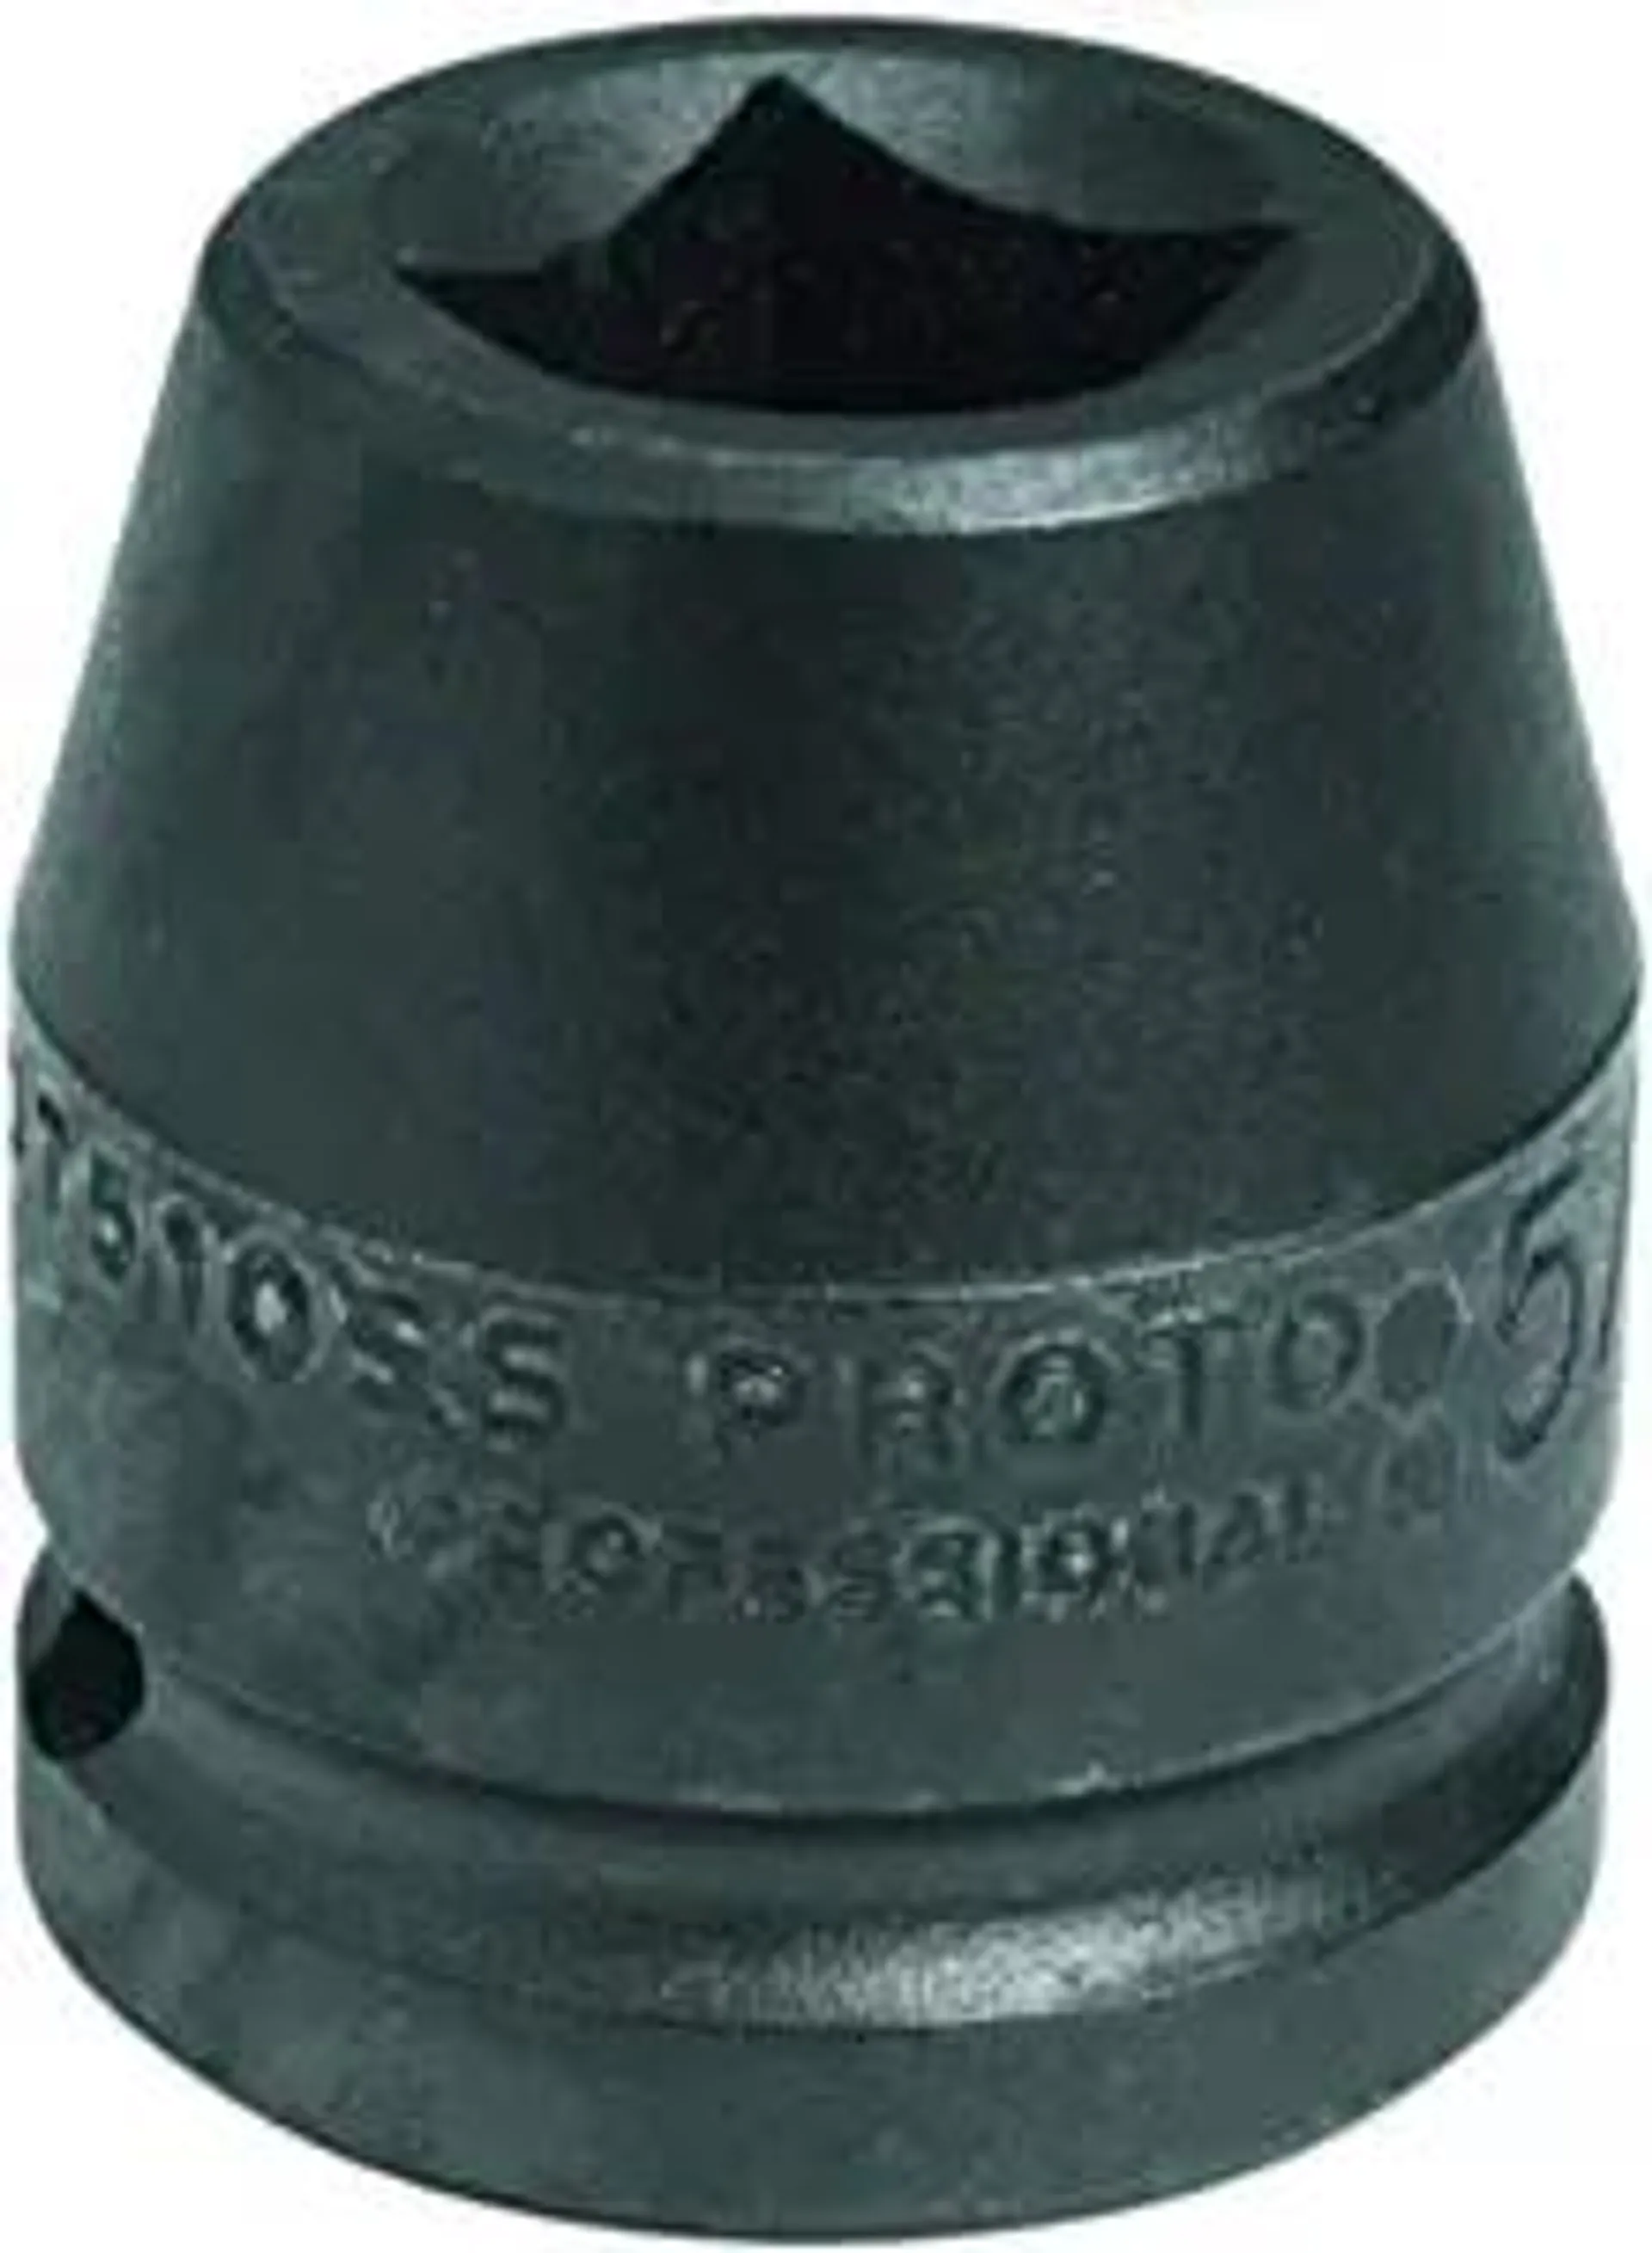 Stanley Proto J07510SS 3/4-Inch Drive Impact Socket, 5/8-Inch, 4 Point